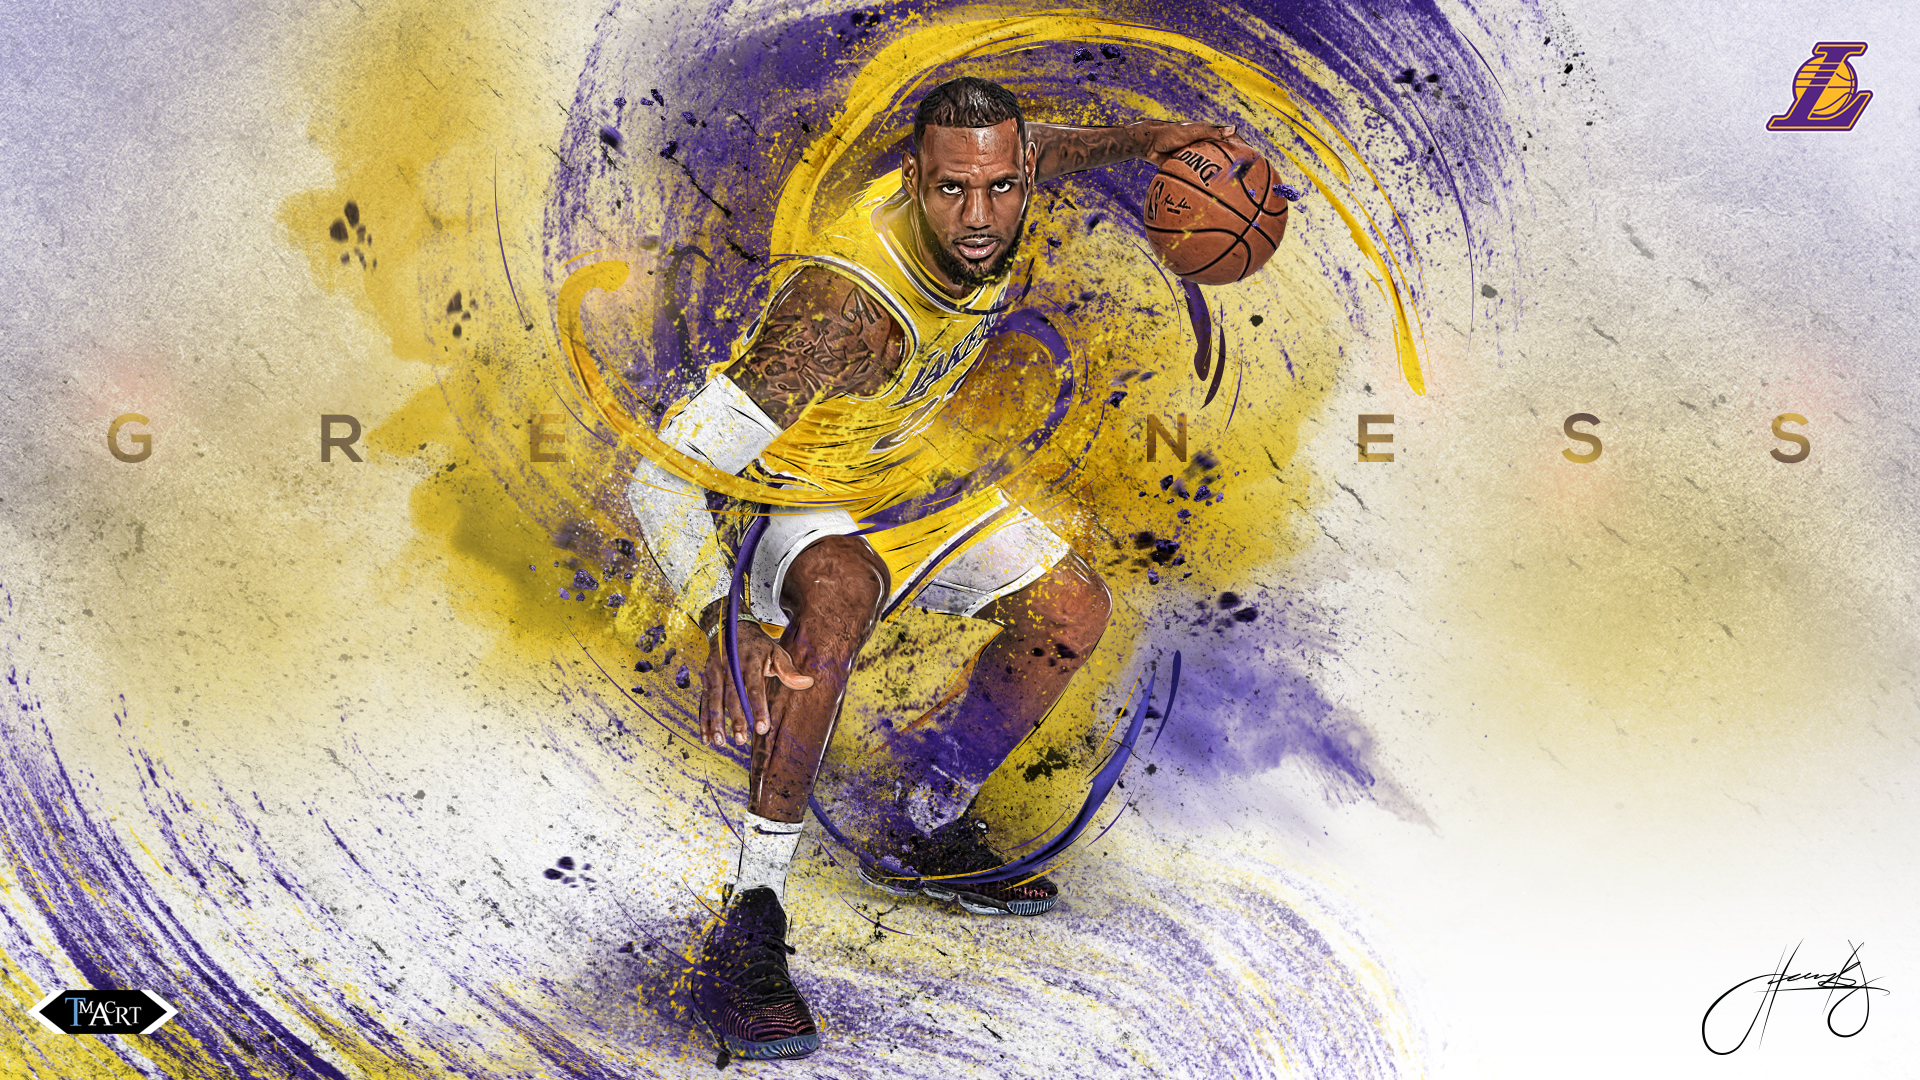 Lebron James L.A. Lakers Greatness